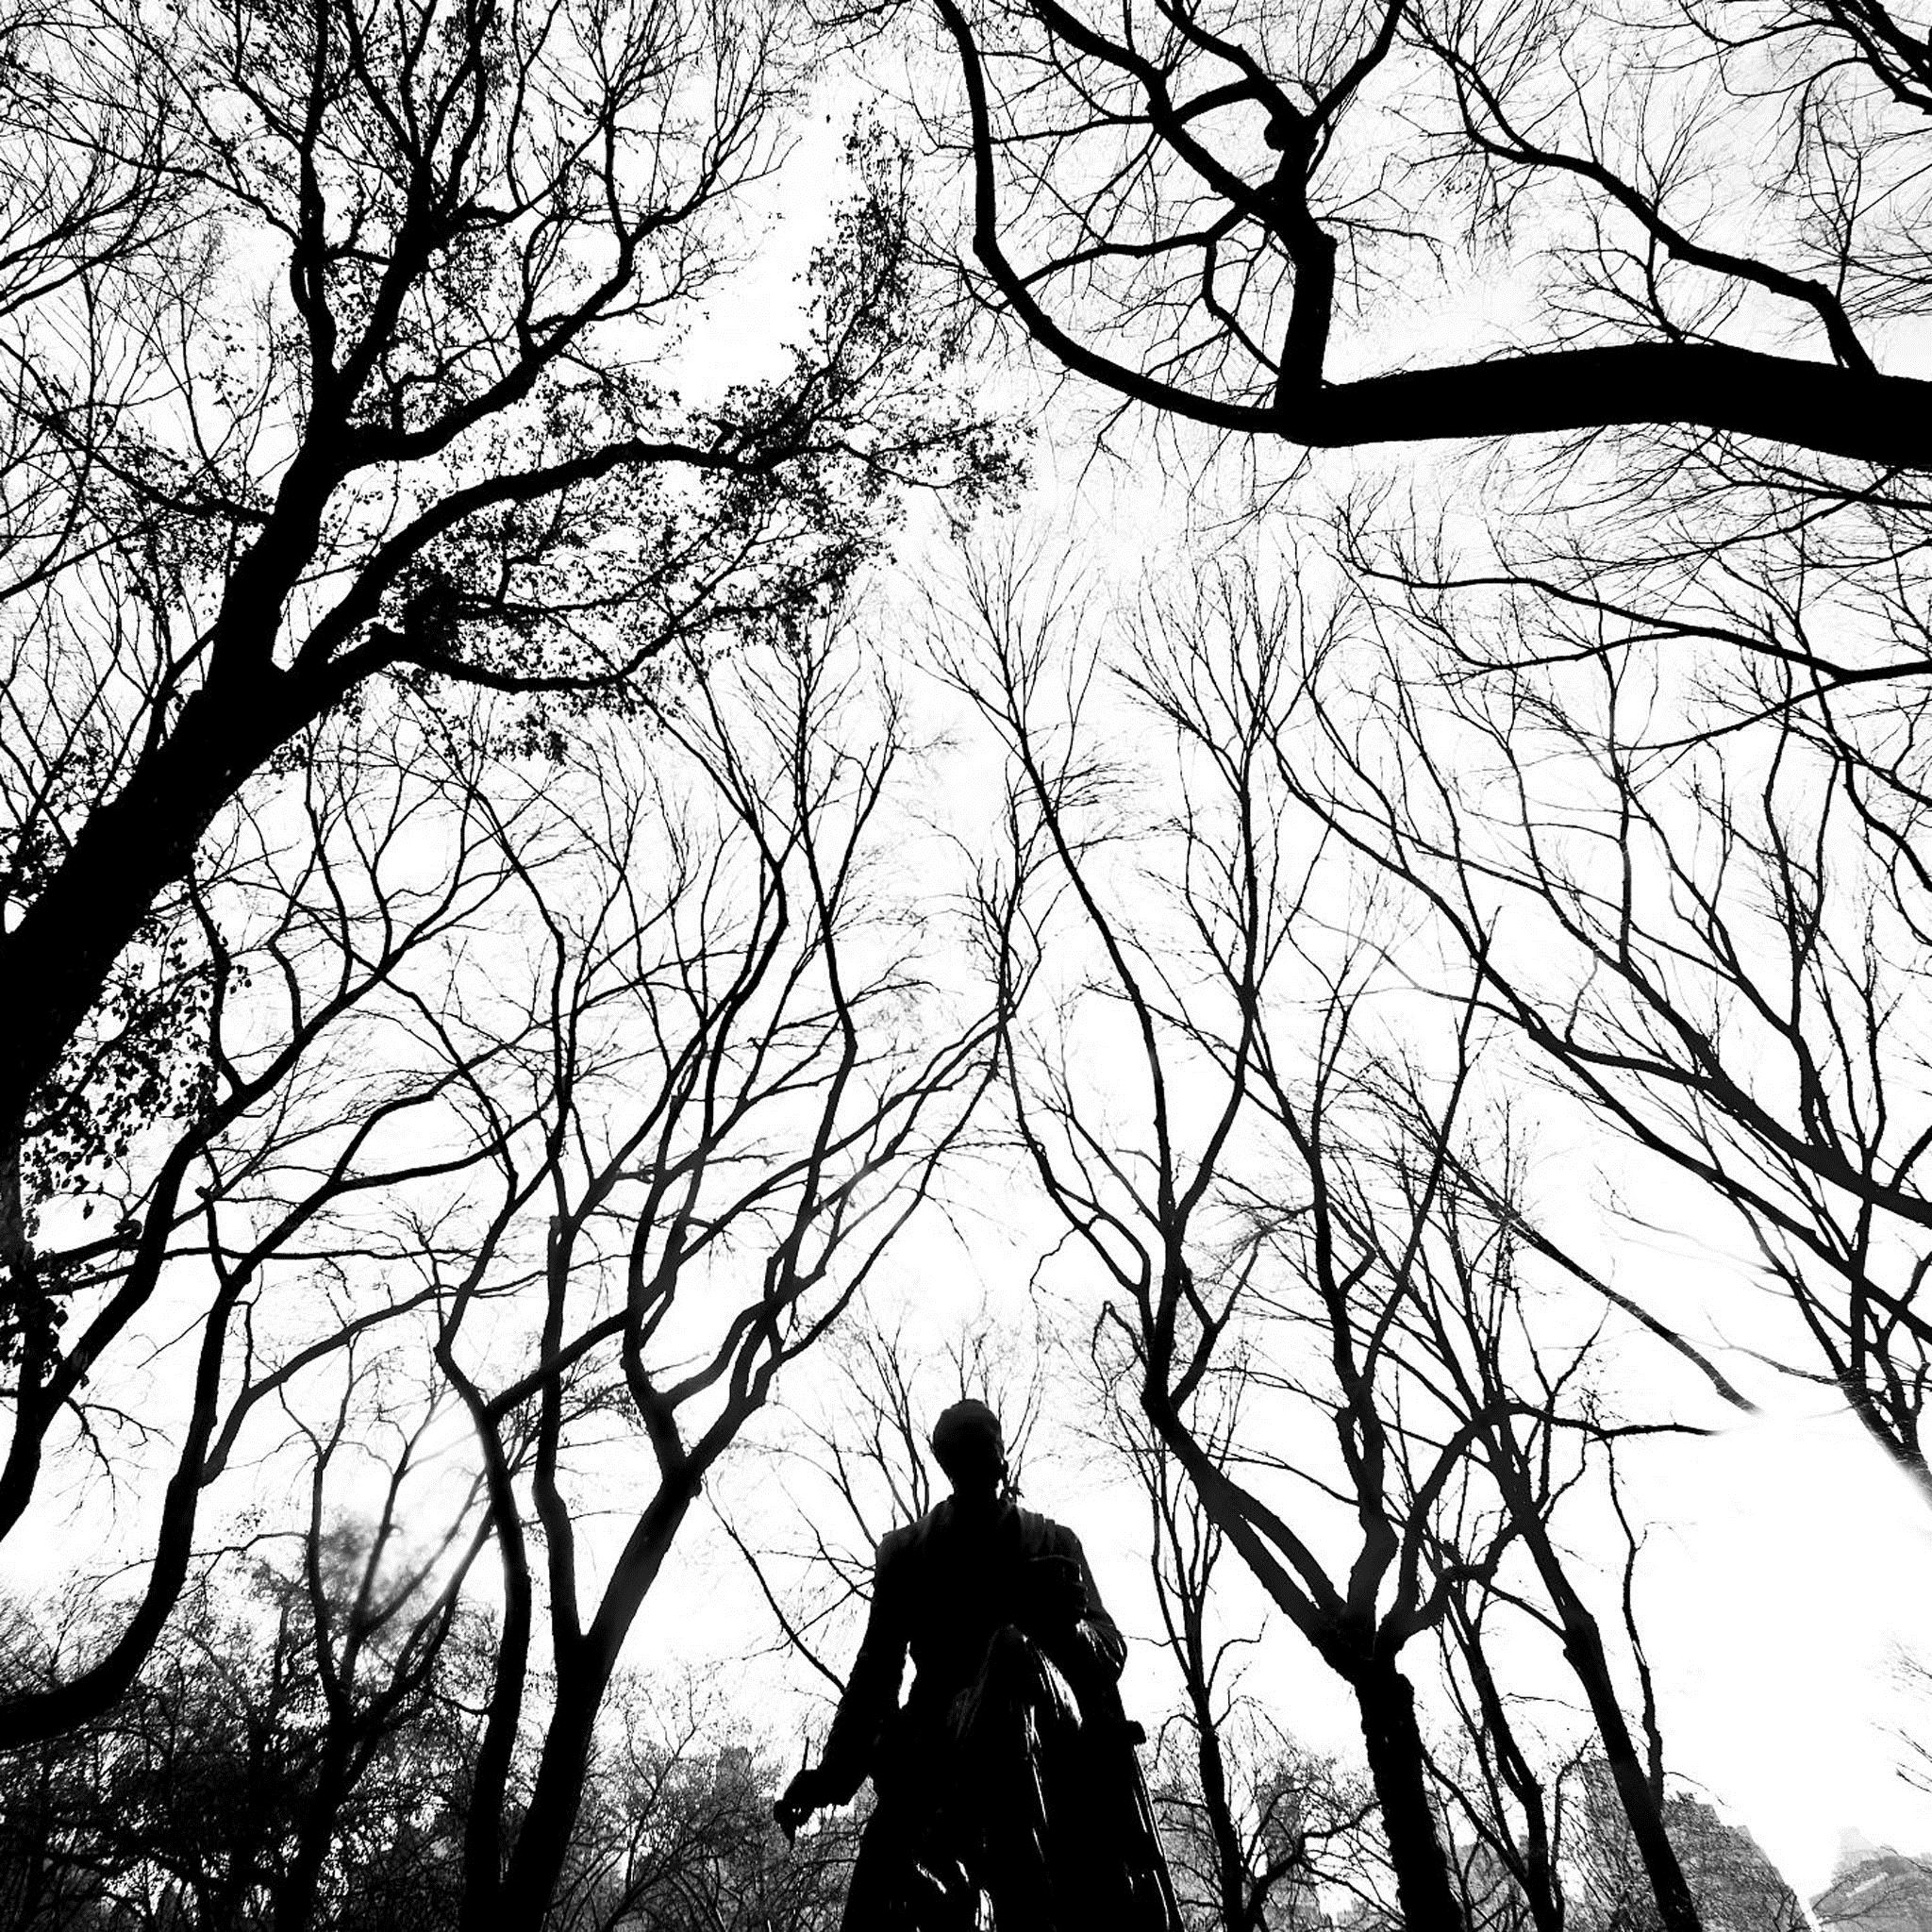 Grayscale Central Park Hawk Branches iPad Air wallpaper 